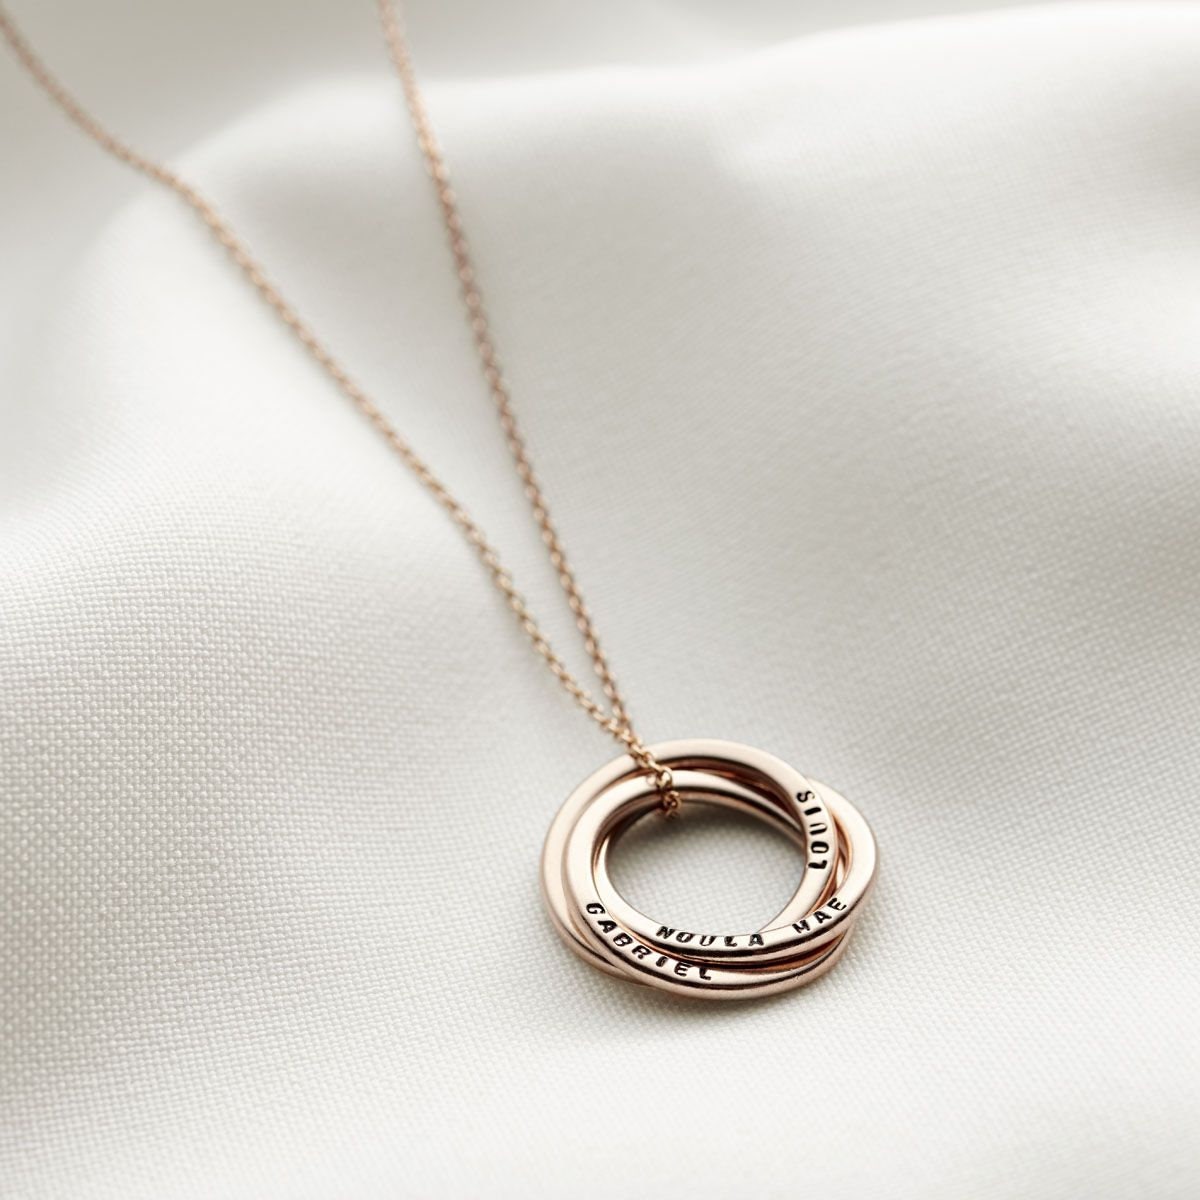 Personalised Russian Ring Necklace | hardtofind.